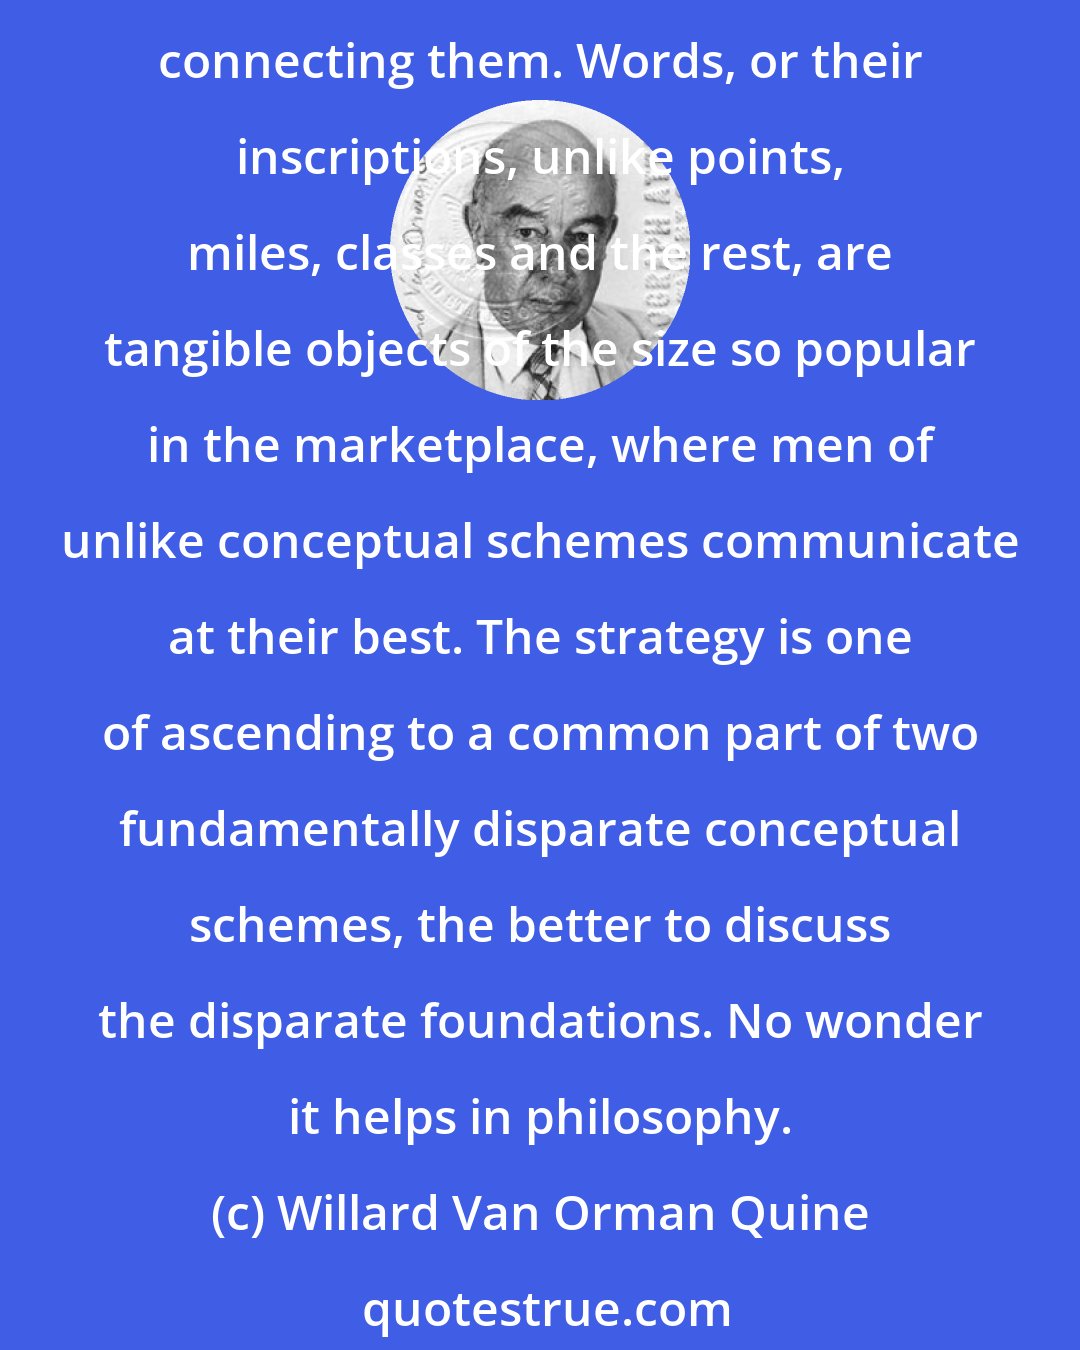 Willard Van Orman Quine: The strategy of semantic ascent is that it carries the discussion into a domain where both parties are better agreed on the objects (viz., words) and on the main terms connecting them. Words, or their inscriptions, unlike points, miles, classes and the rest, are tangible objects of the size so popular in the marketplace, where men of unlike conceptual schemes communicate at their best. The strategy is one of ascending to a common part of two fundamentally disparate conceptual schemes, the better to discuss the disparate foundations. No wonder it helps in philosophy.